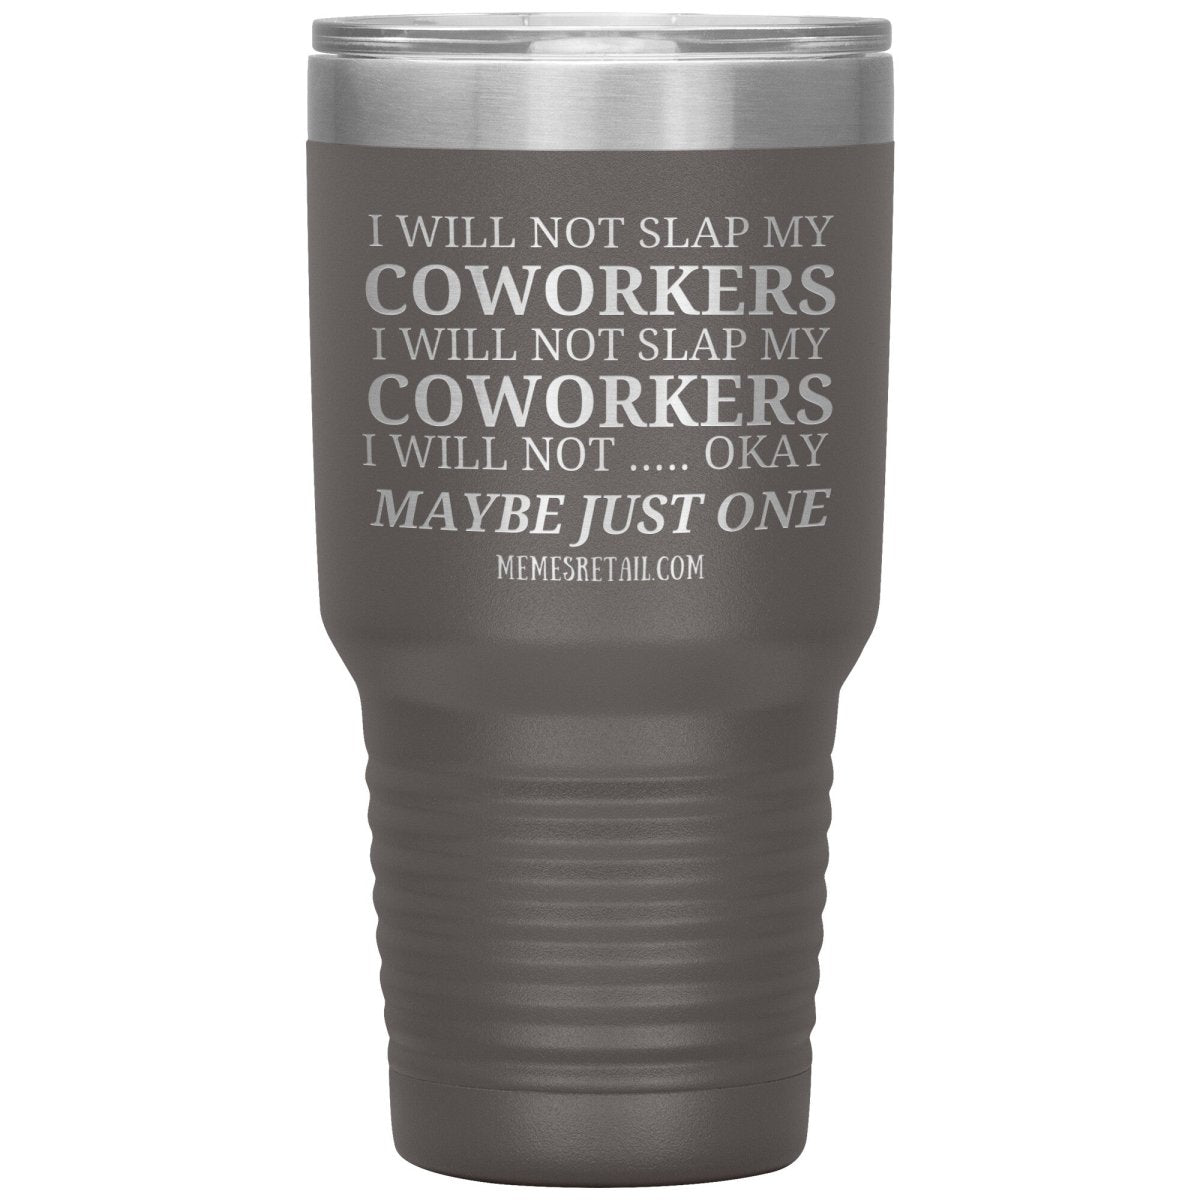 I will not slap my coworker… Tumblers, 30oz Insulated Tumbler / Pewter - MemesRetail.com